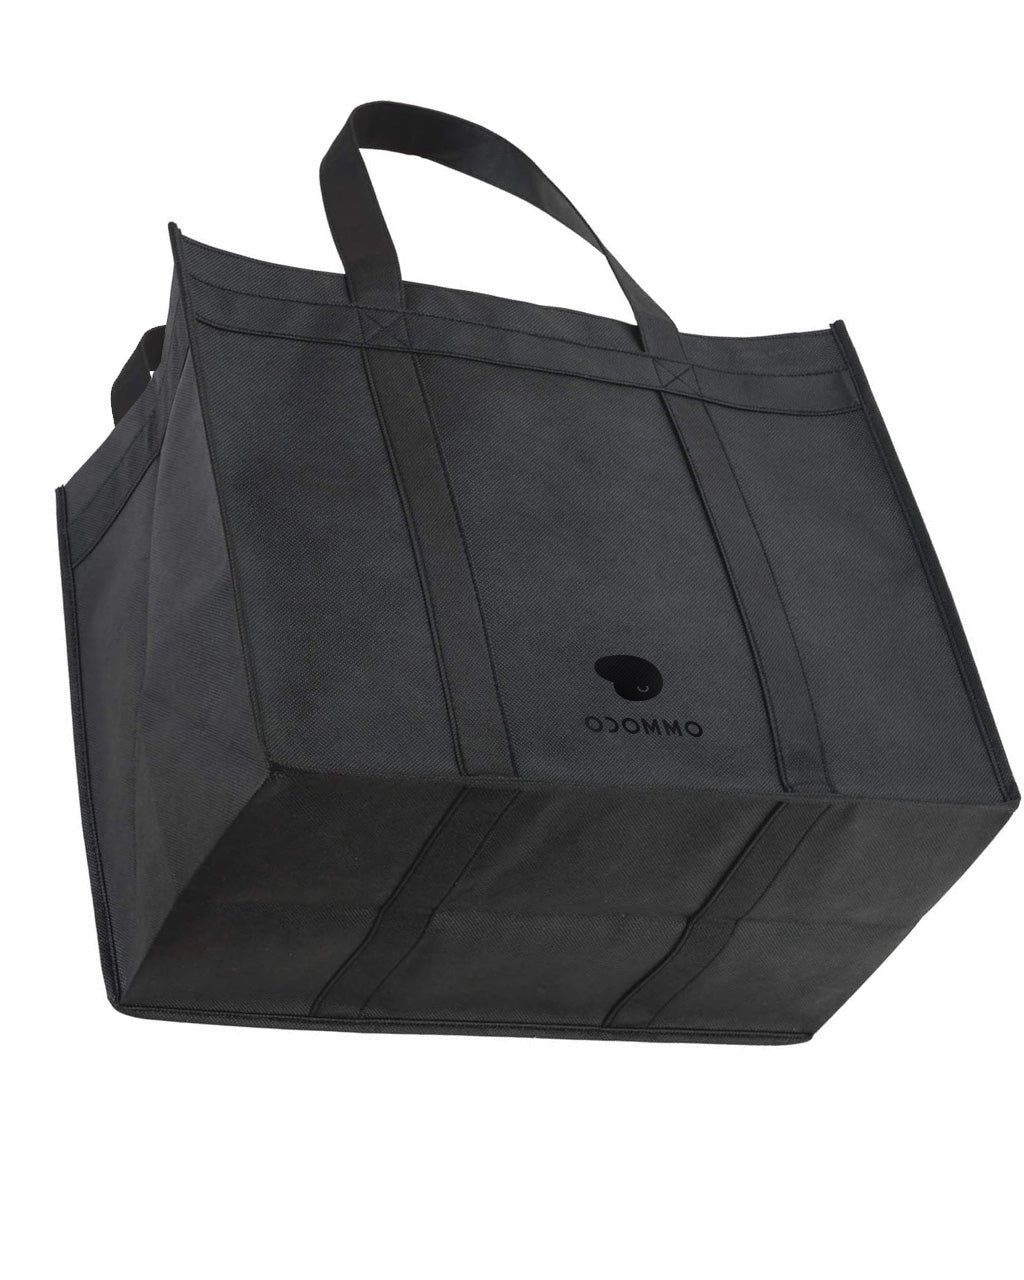 OCOMMO Reusable Heavy Duty Grocery Shopping Bags